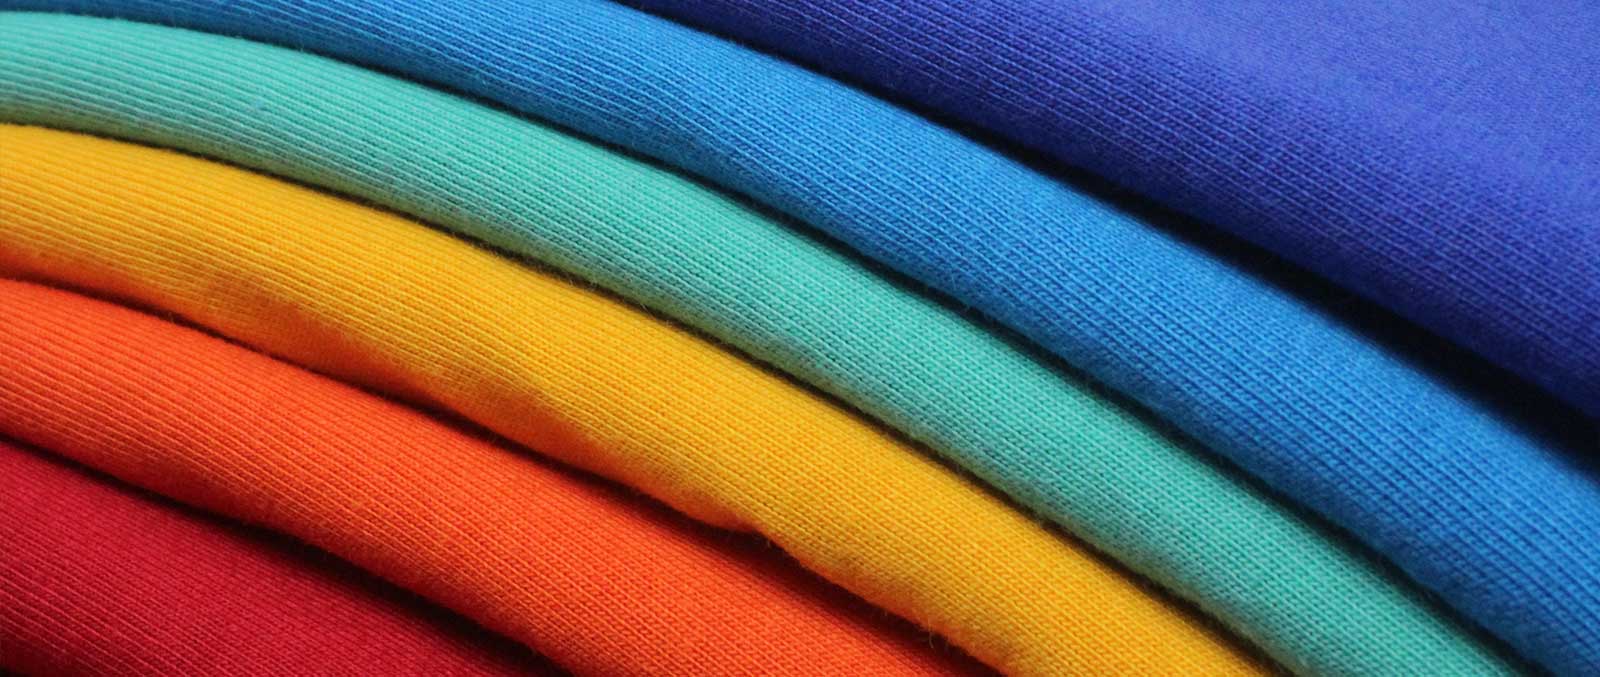 Does Polyester Shrink? Tips and Tricks Ensure Your Clothes Last Longer -  Thula Tula